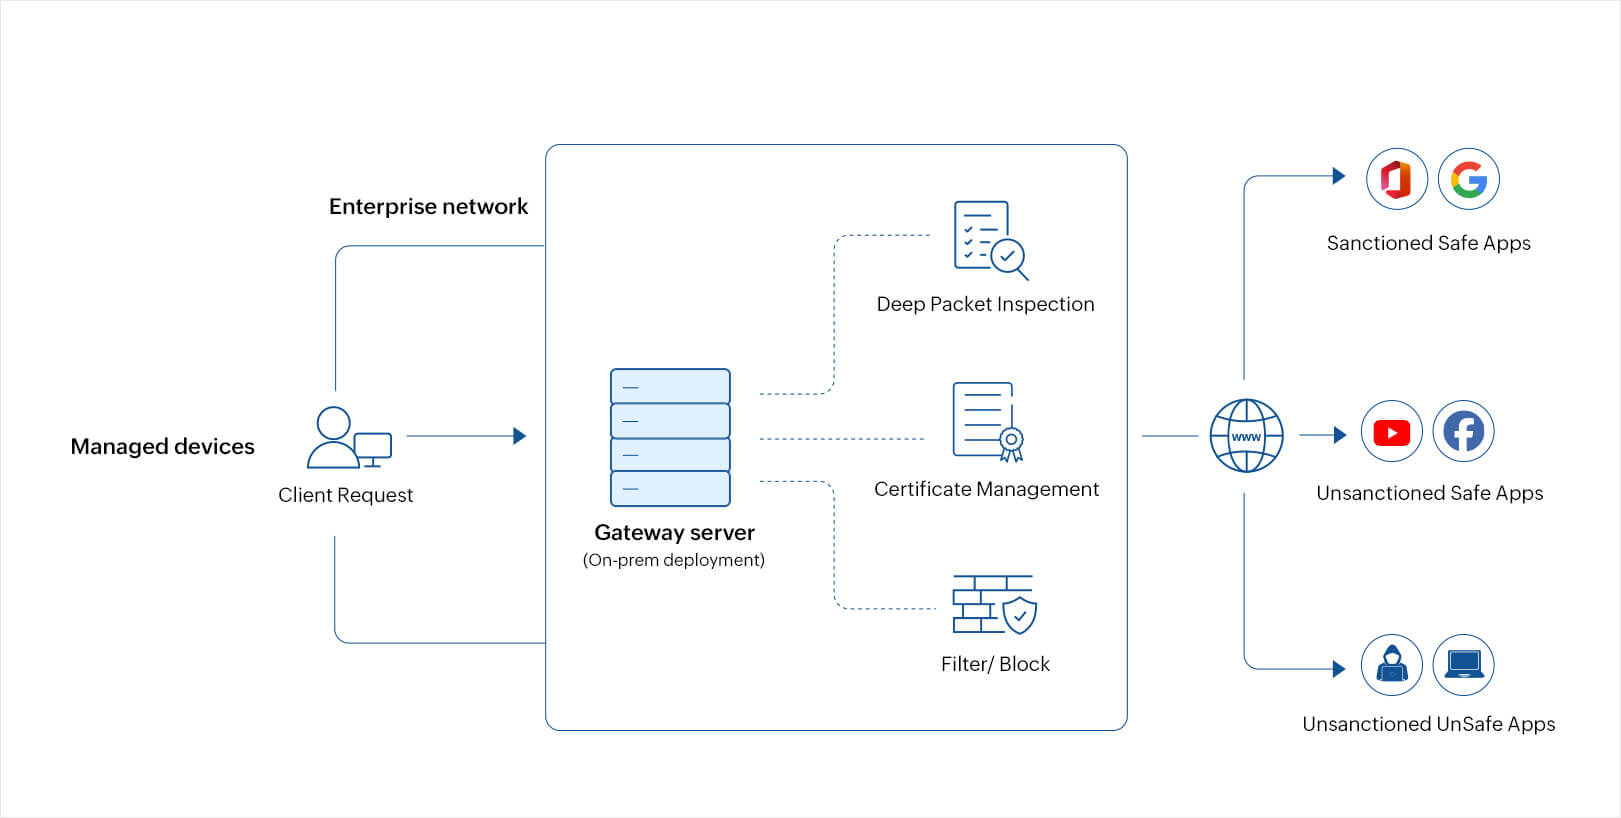 Forward proxy architecture diagram: The gateway server, configured on premises on the client's side intercepts outbound traffic, conducts DPI, manages SSL/TLS certificates, and can apply filtering or blocking mechanisms to enforce security policies and protect sensitive data